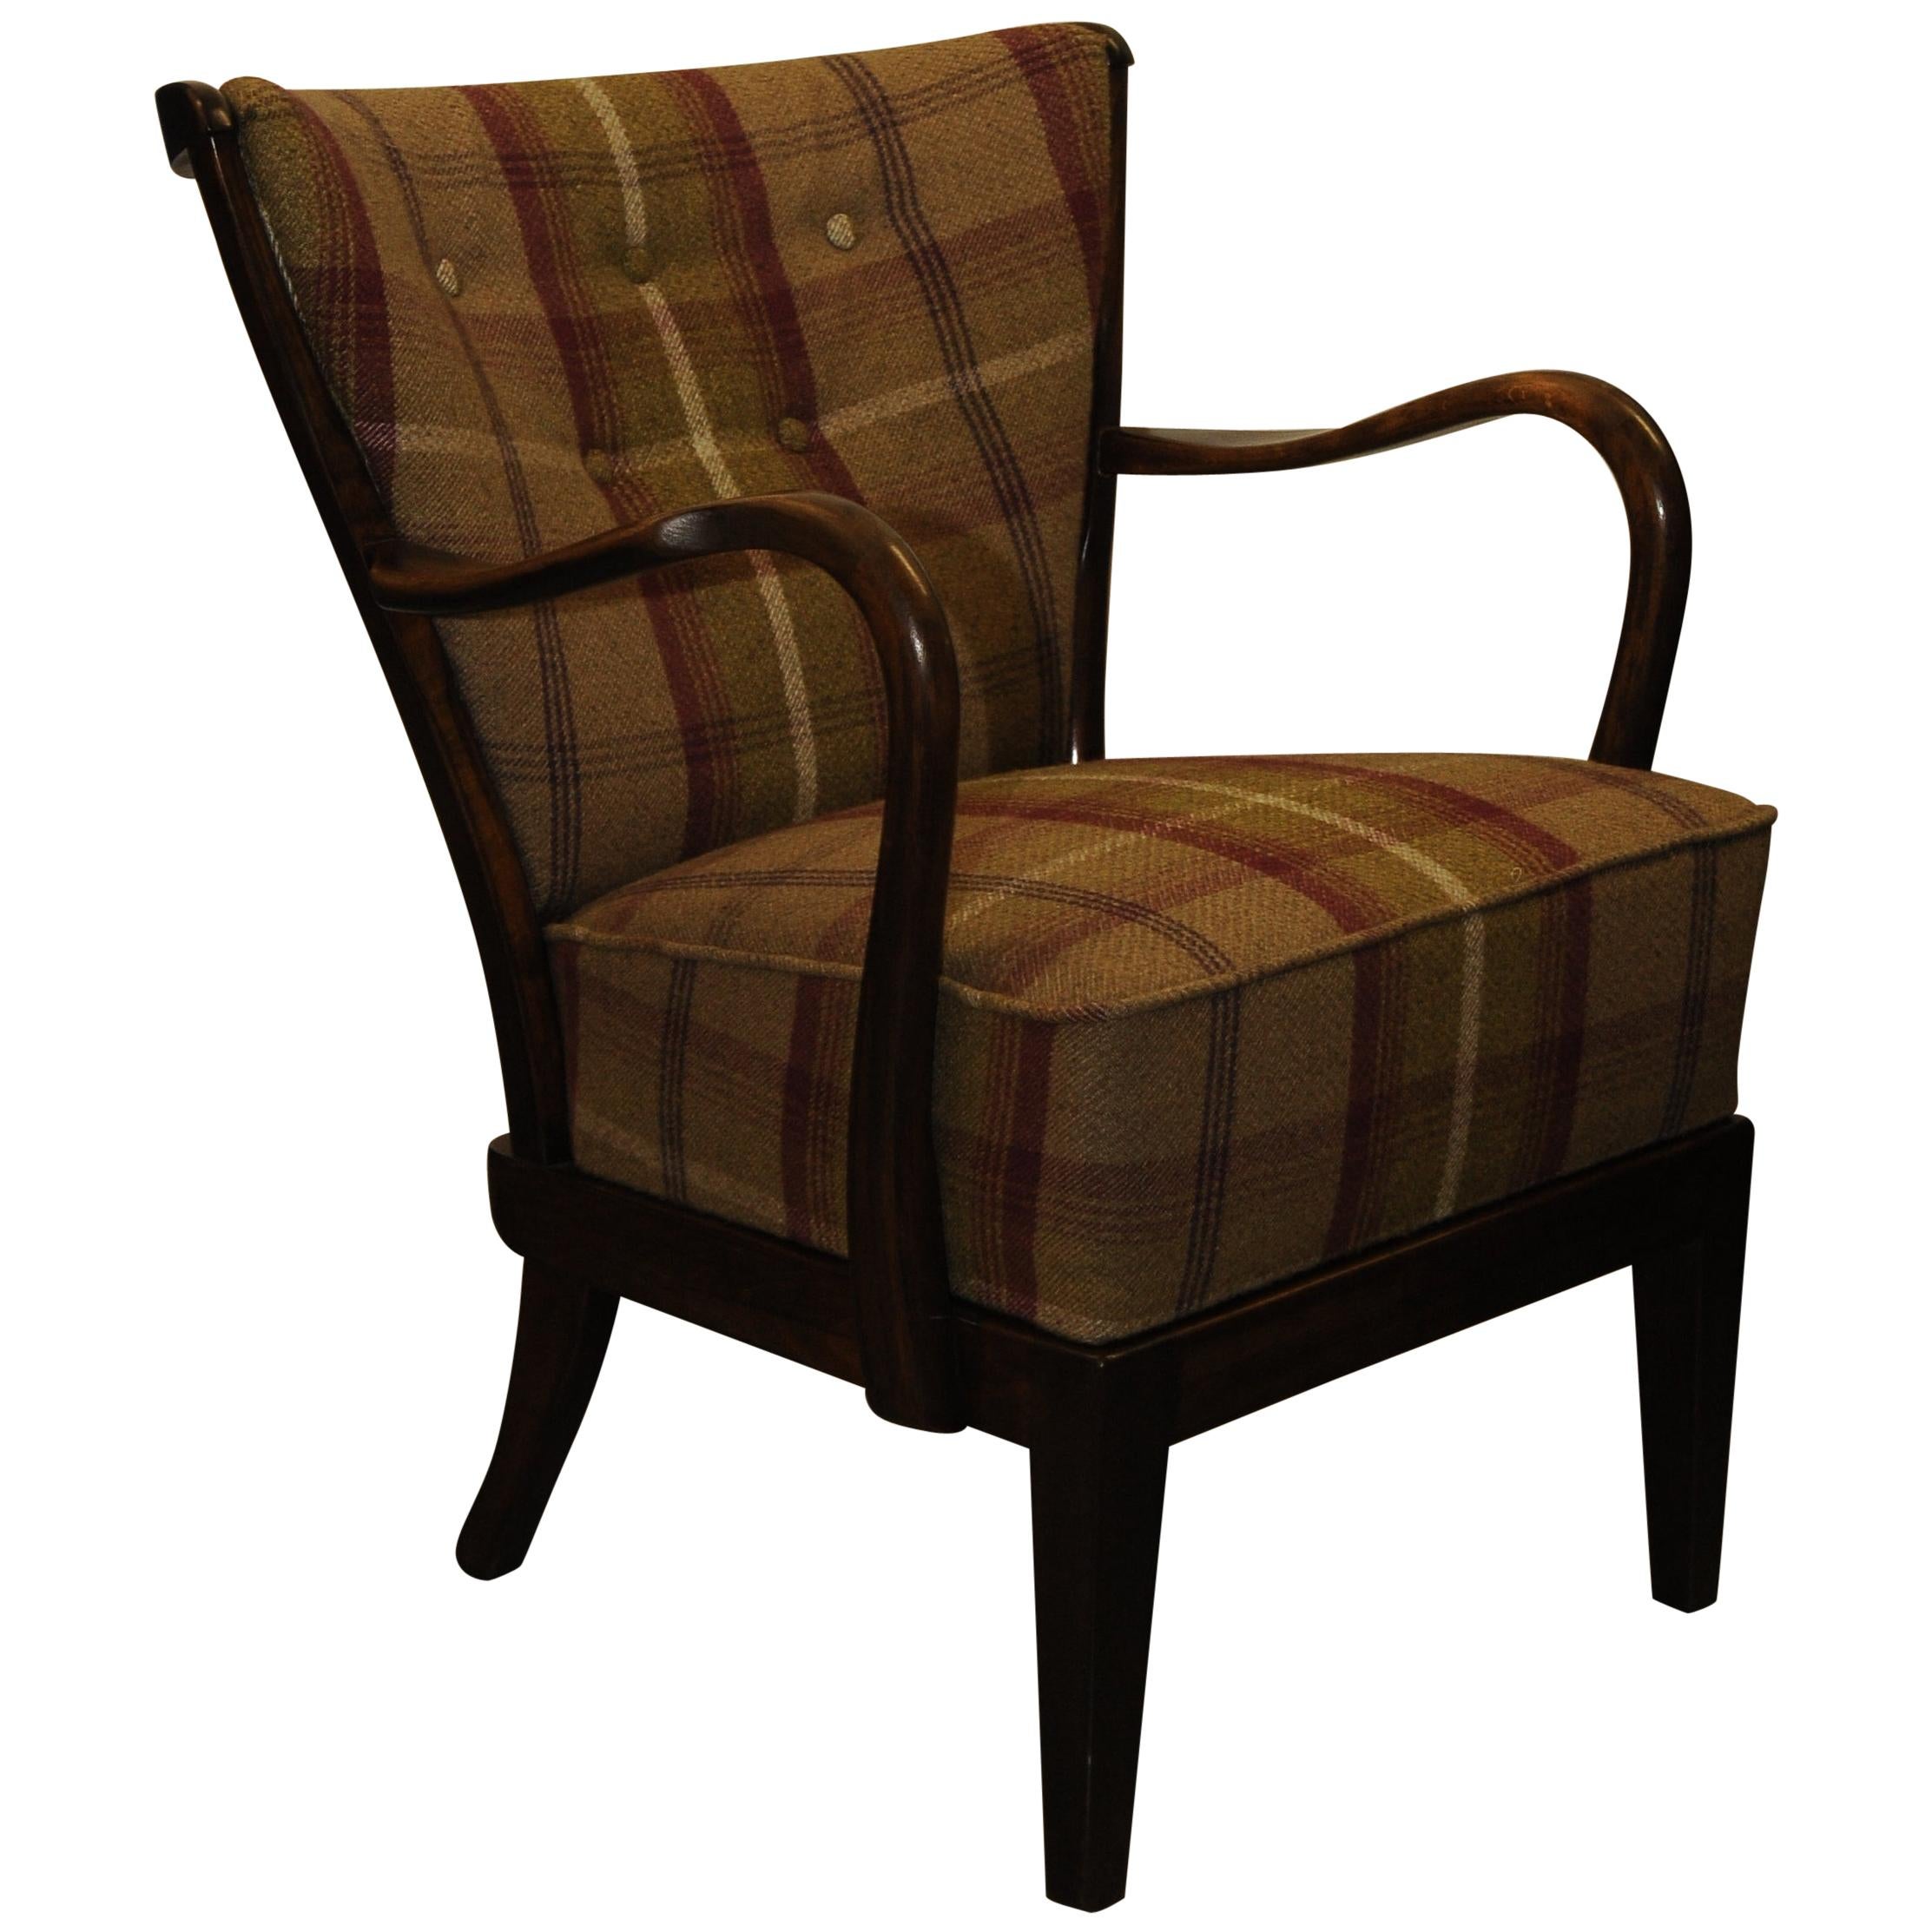 1930s DUX Scandinavian Art Deco Bentwood Armchair with Patterned Upholstery For Sale